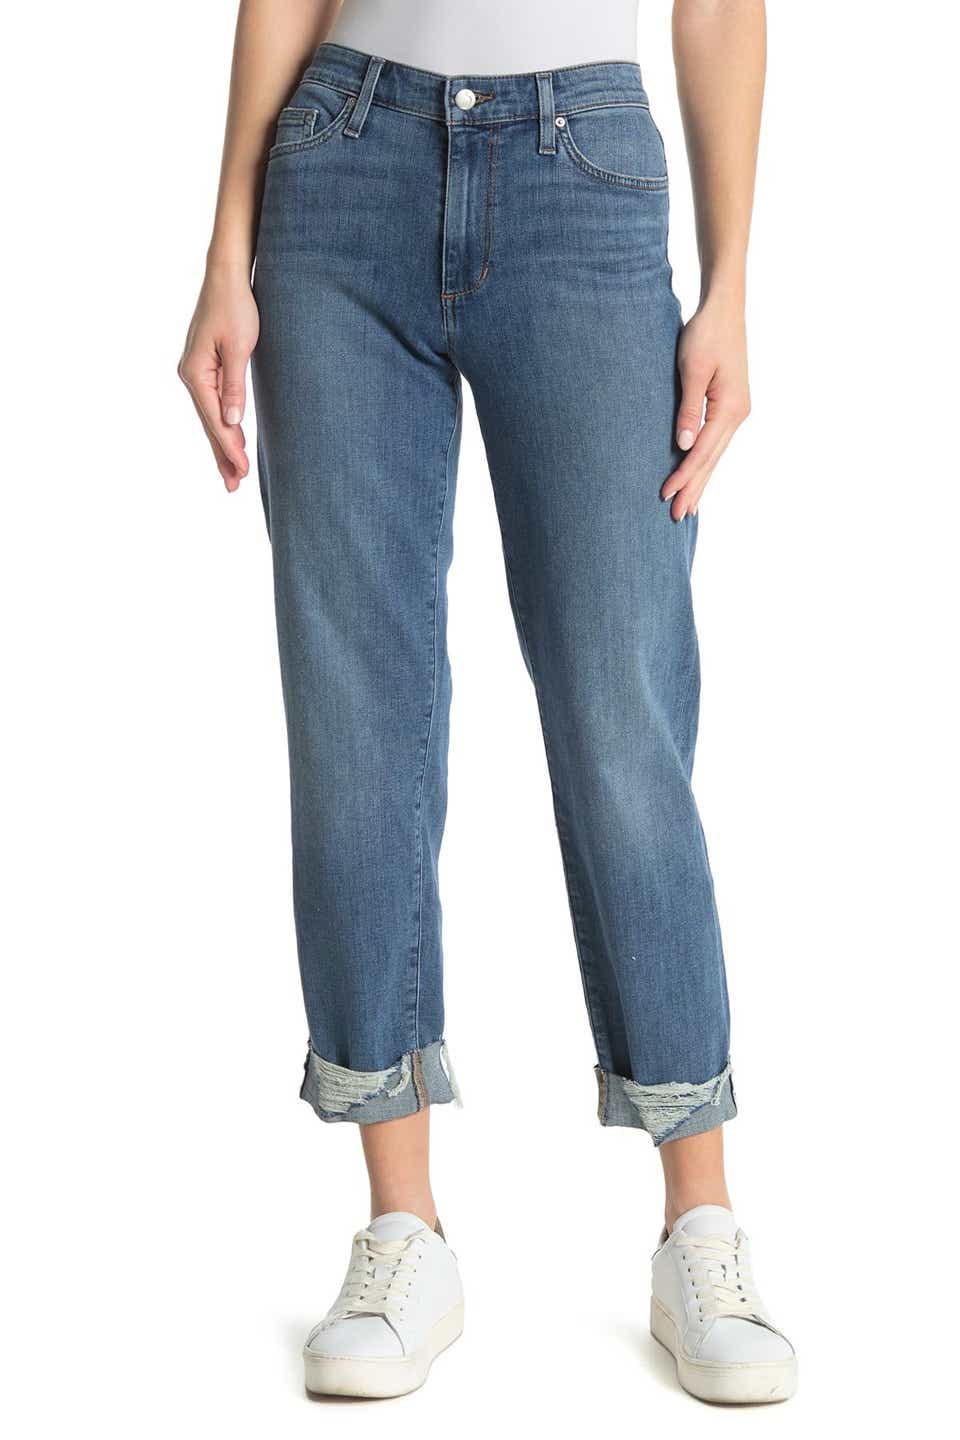 Best Jeans for Women; Ripped, Distressed